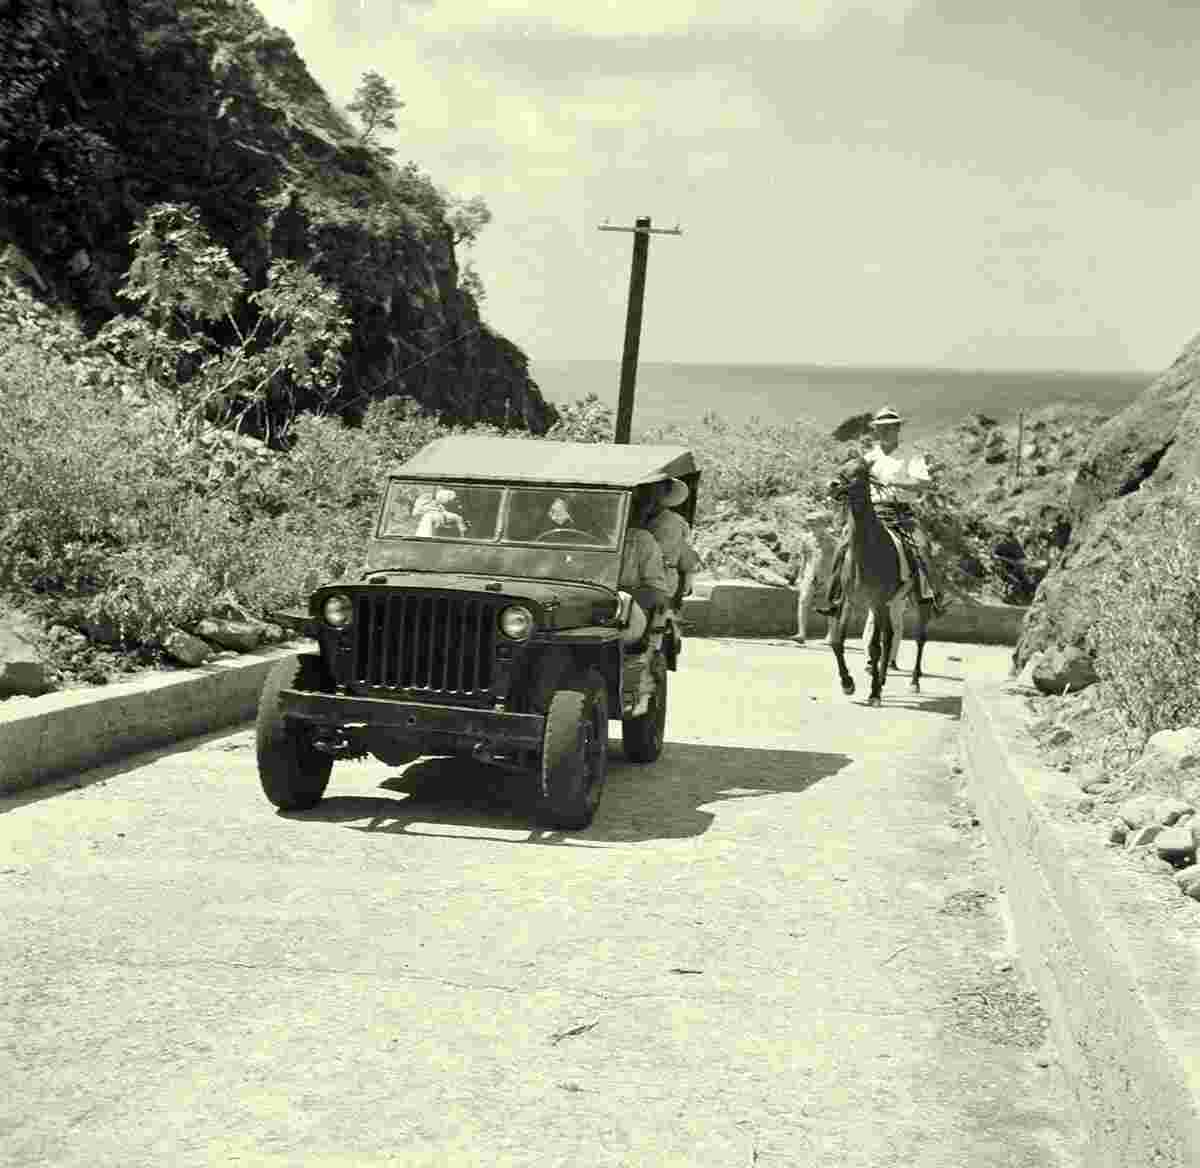 The Botton. On the road in a jeep, 1947